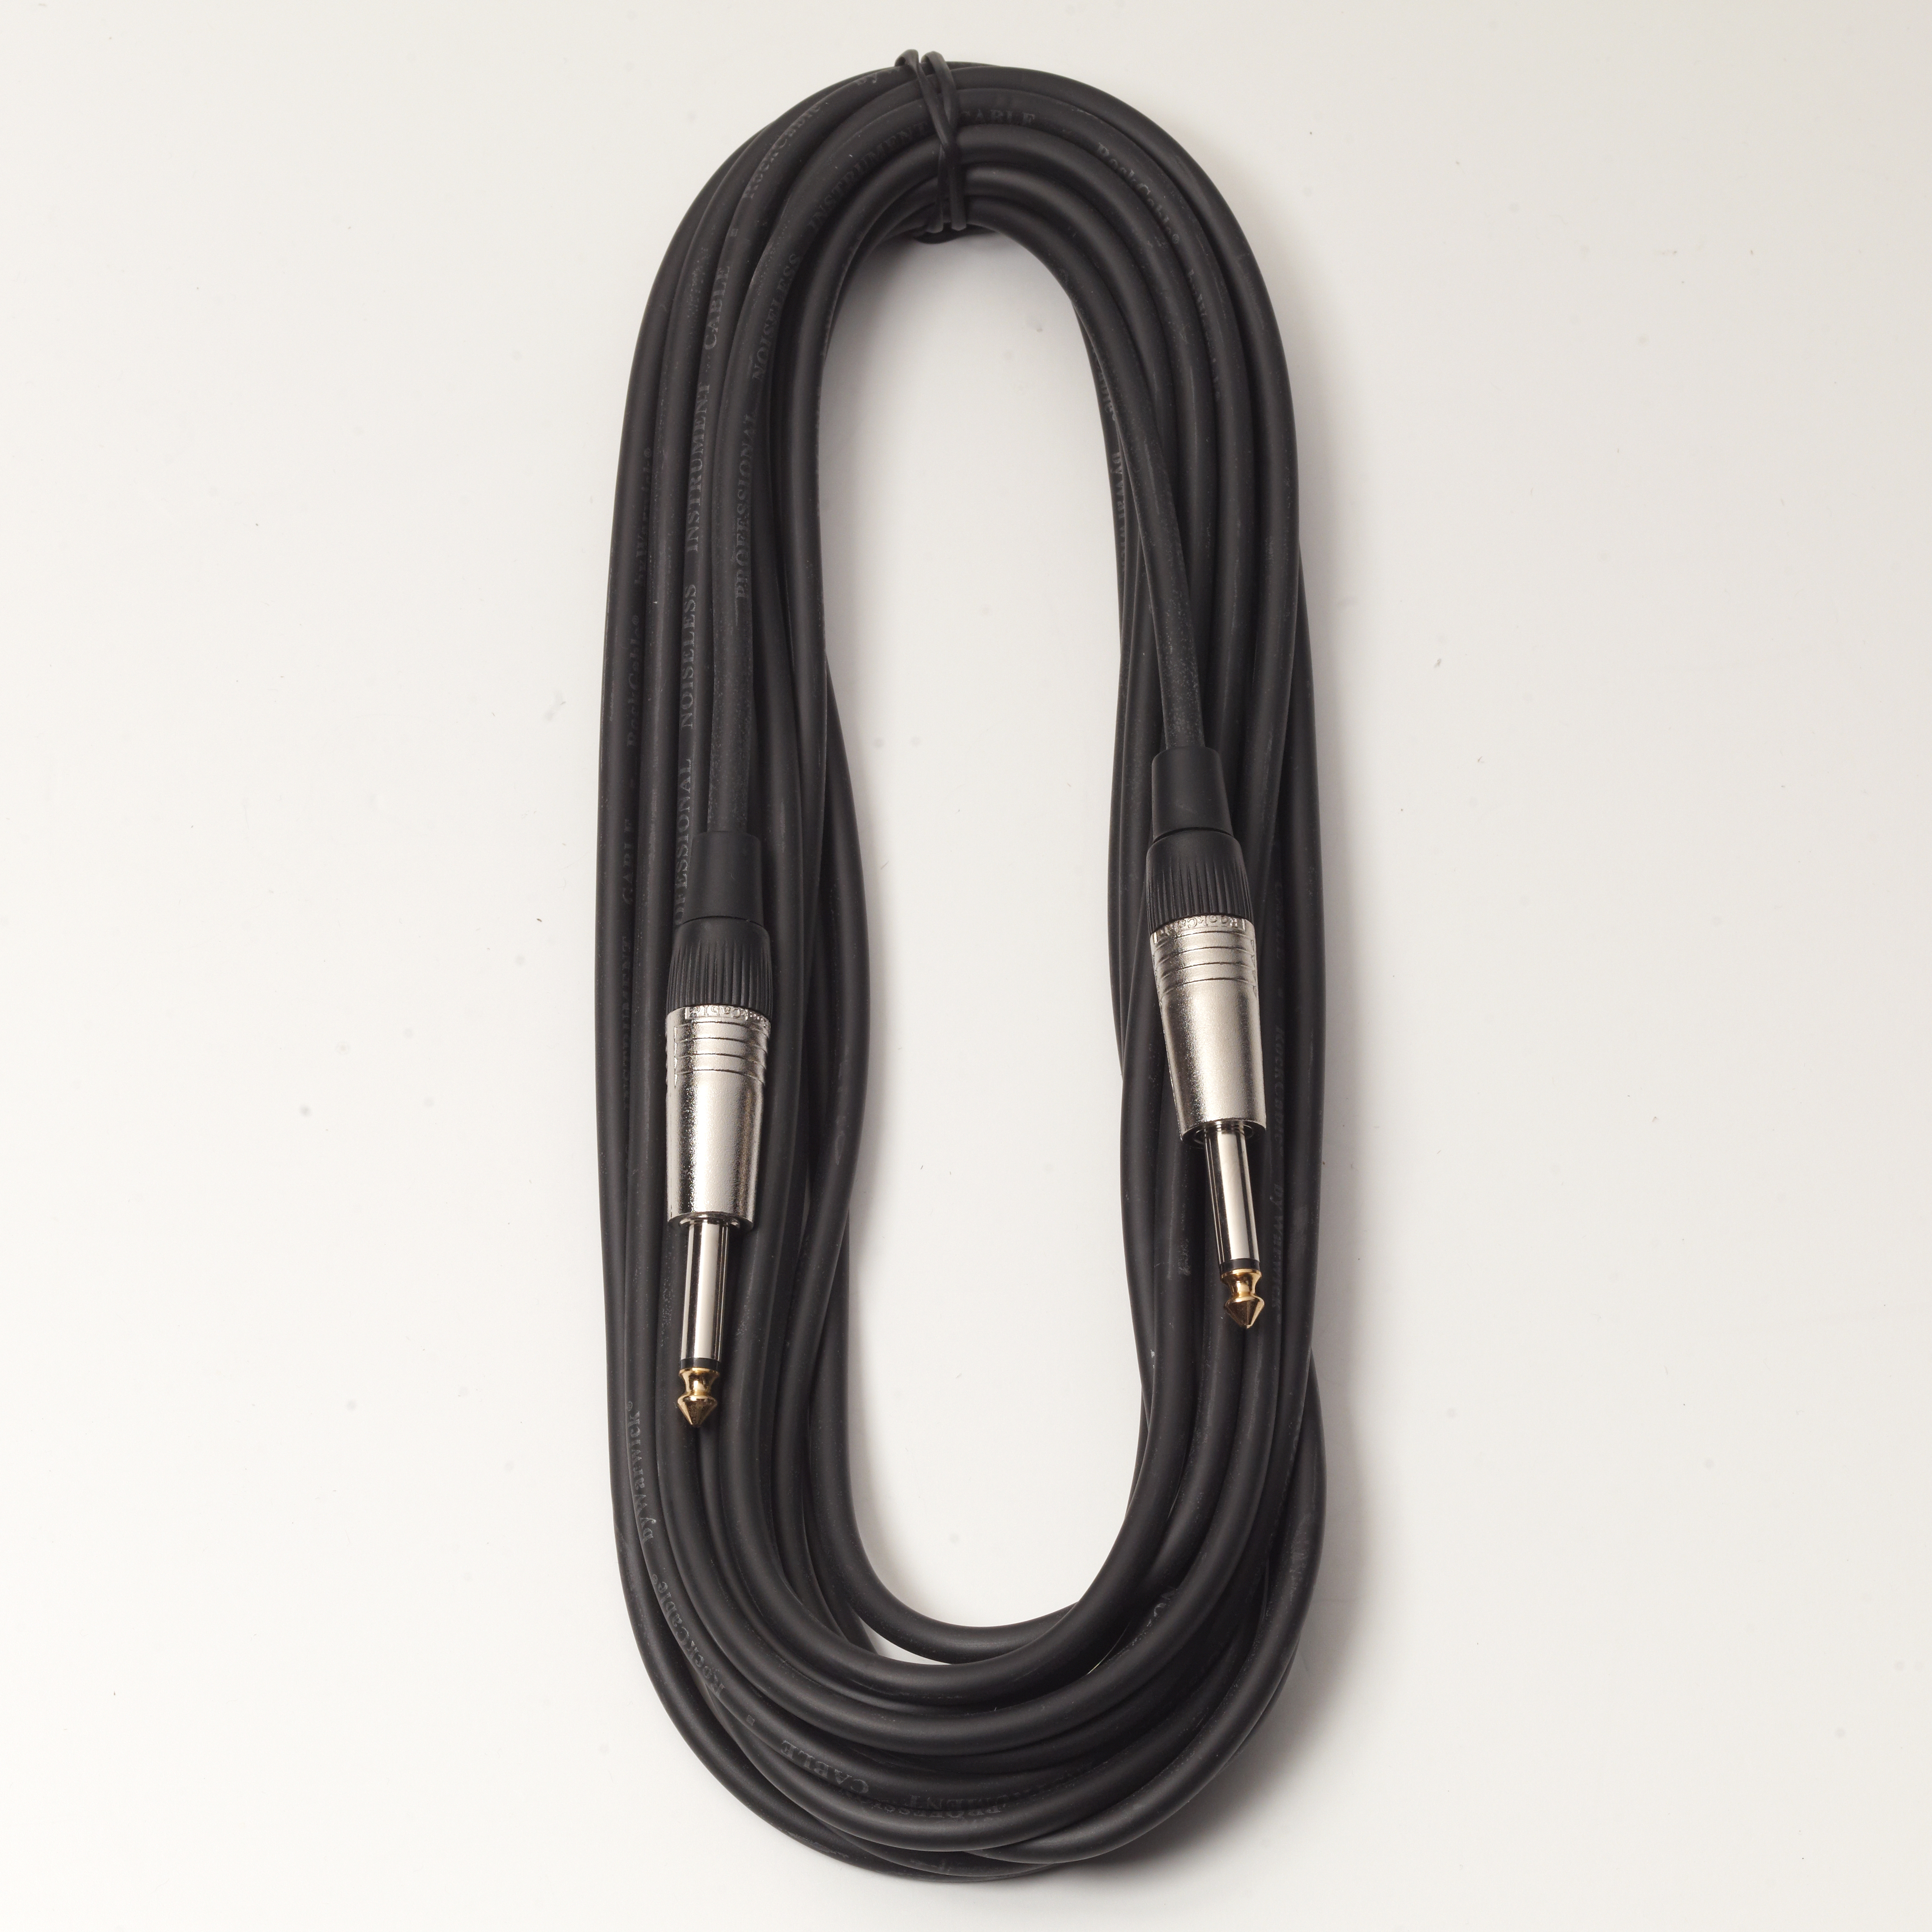 RockCable Instrument Cable - straight TS (6.3 mm / 1/4"), 9 m / 29.5 ft - Black